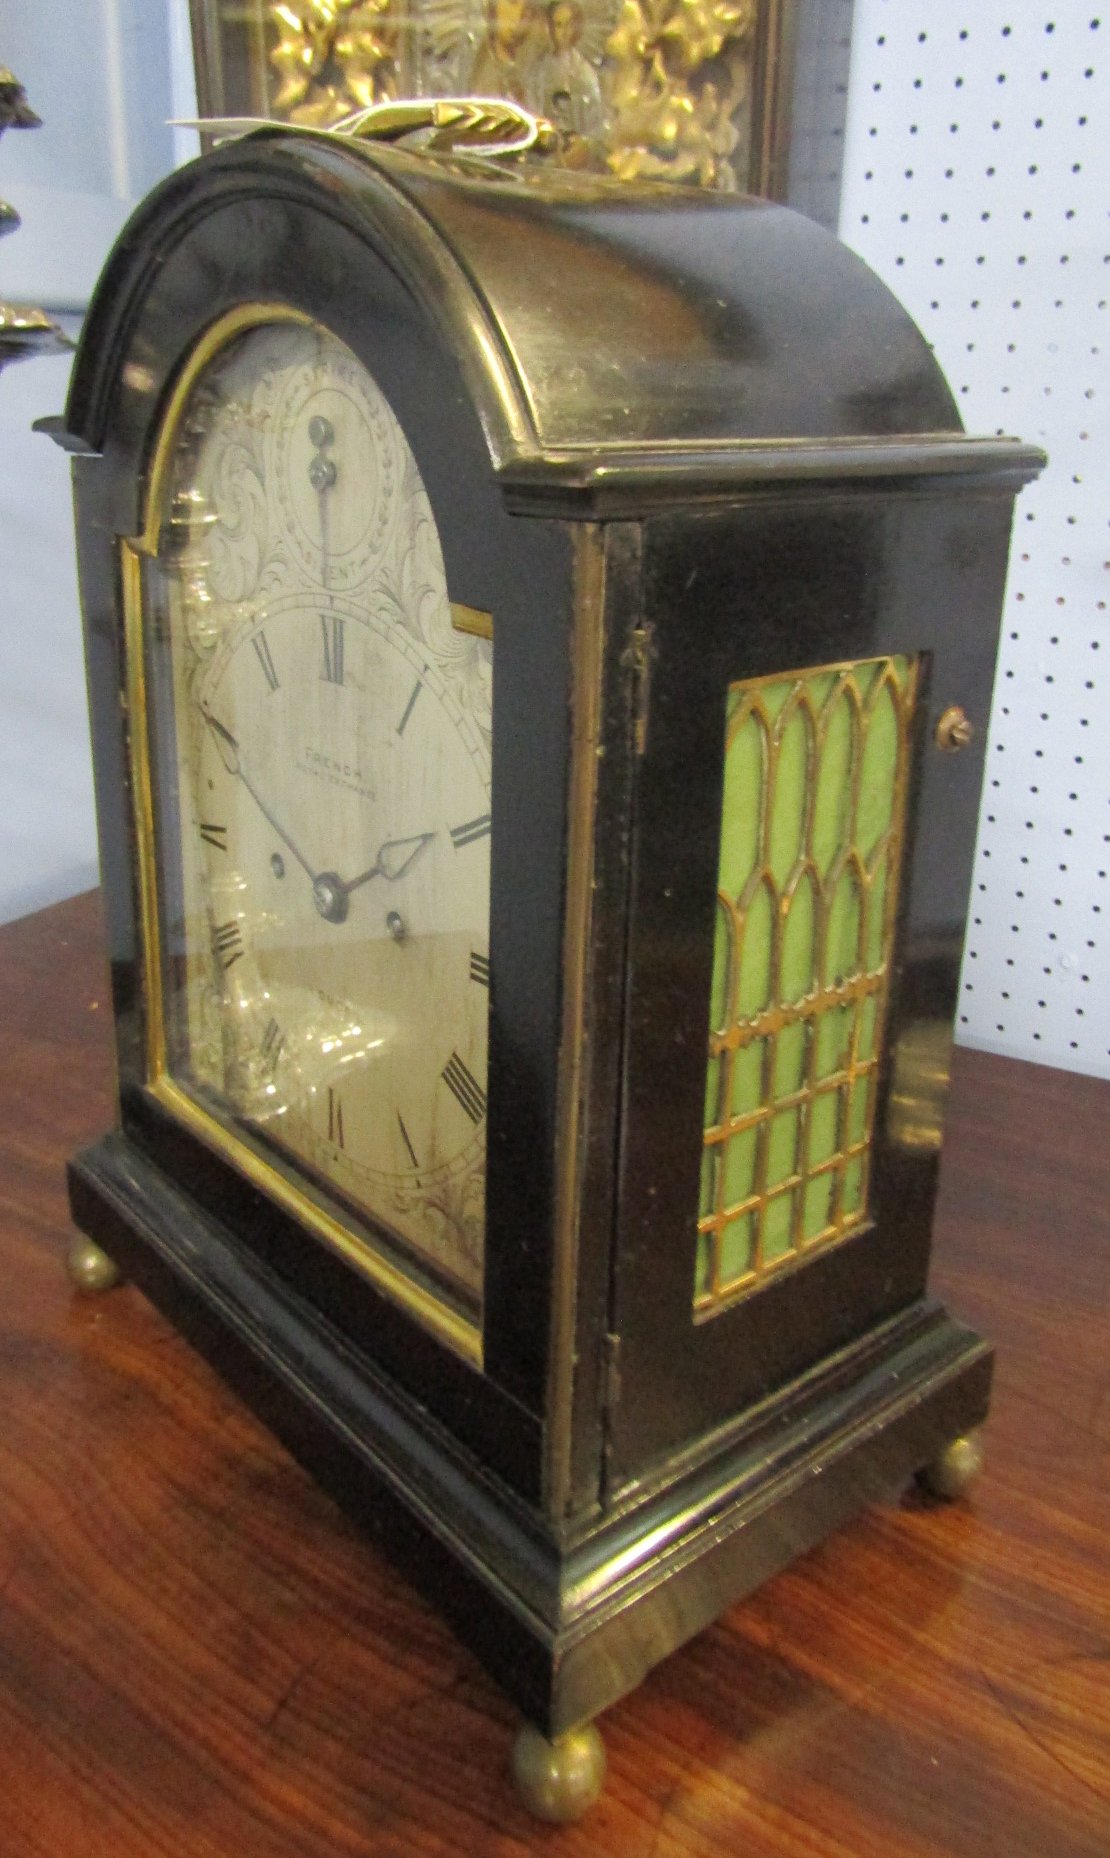 Mid-19th century ebonised twin fusee bracket clock, French - Royal Exchange, London, the arched case - Image 11 of 15